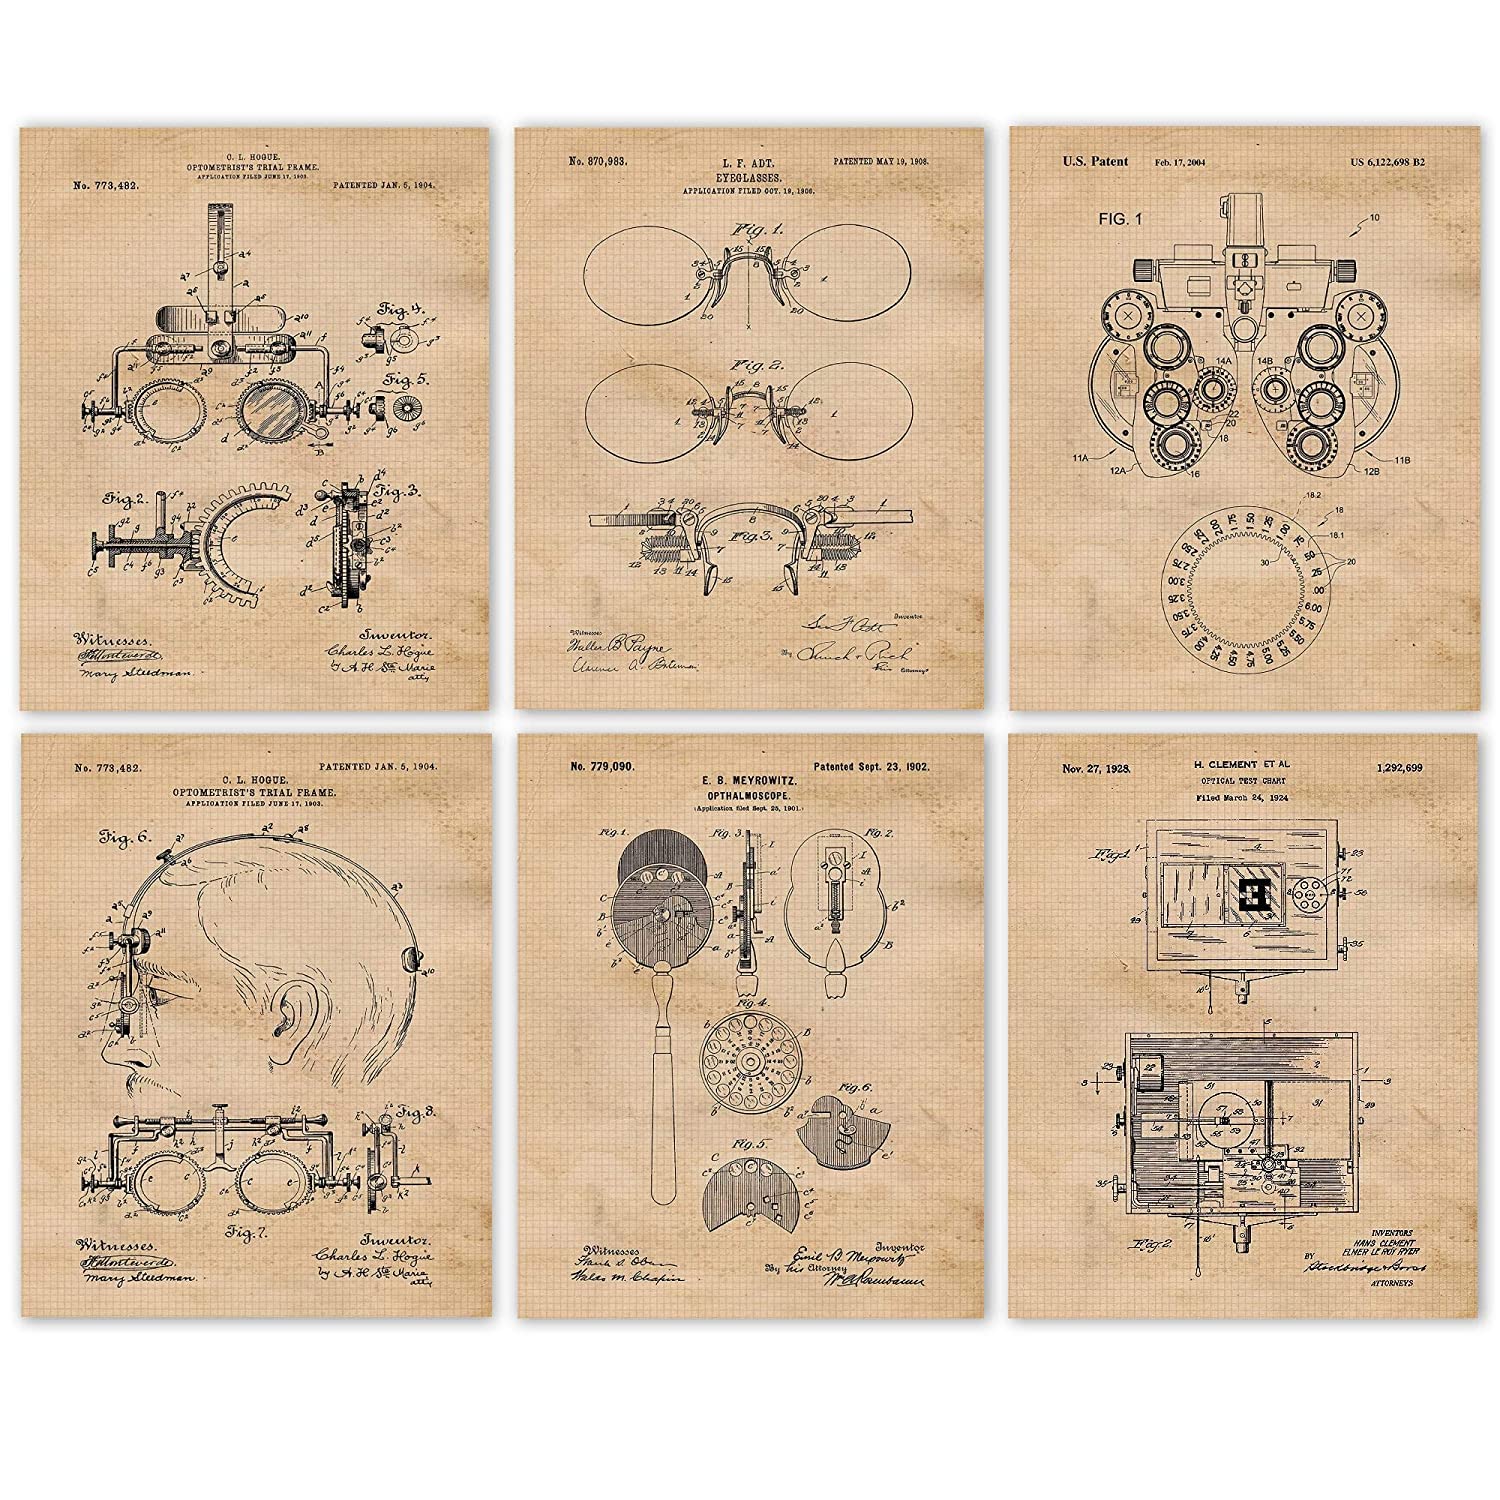 Vintage Optometry Patent Prints, 6 (8x10) Unframed Photo, Wall Art Decor Gifts Under 20 for Home Office Garage Shop Man Cave Smart Studio Student Teacher Eye Glasses Doctor Vision Fan